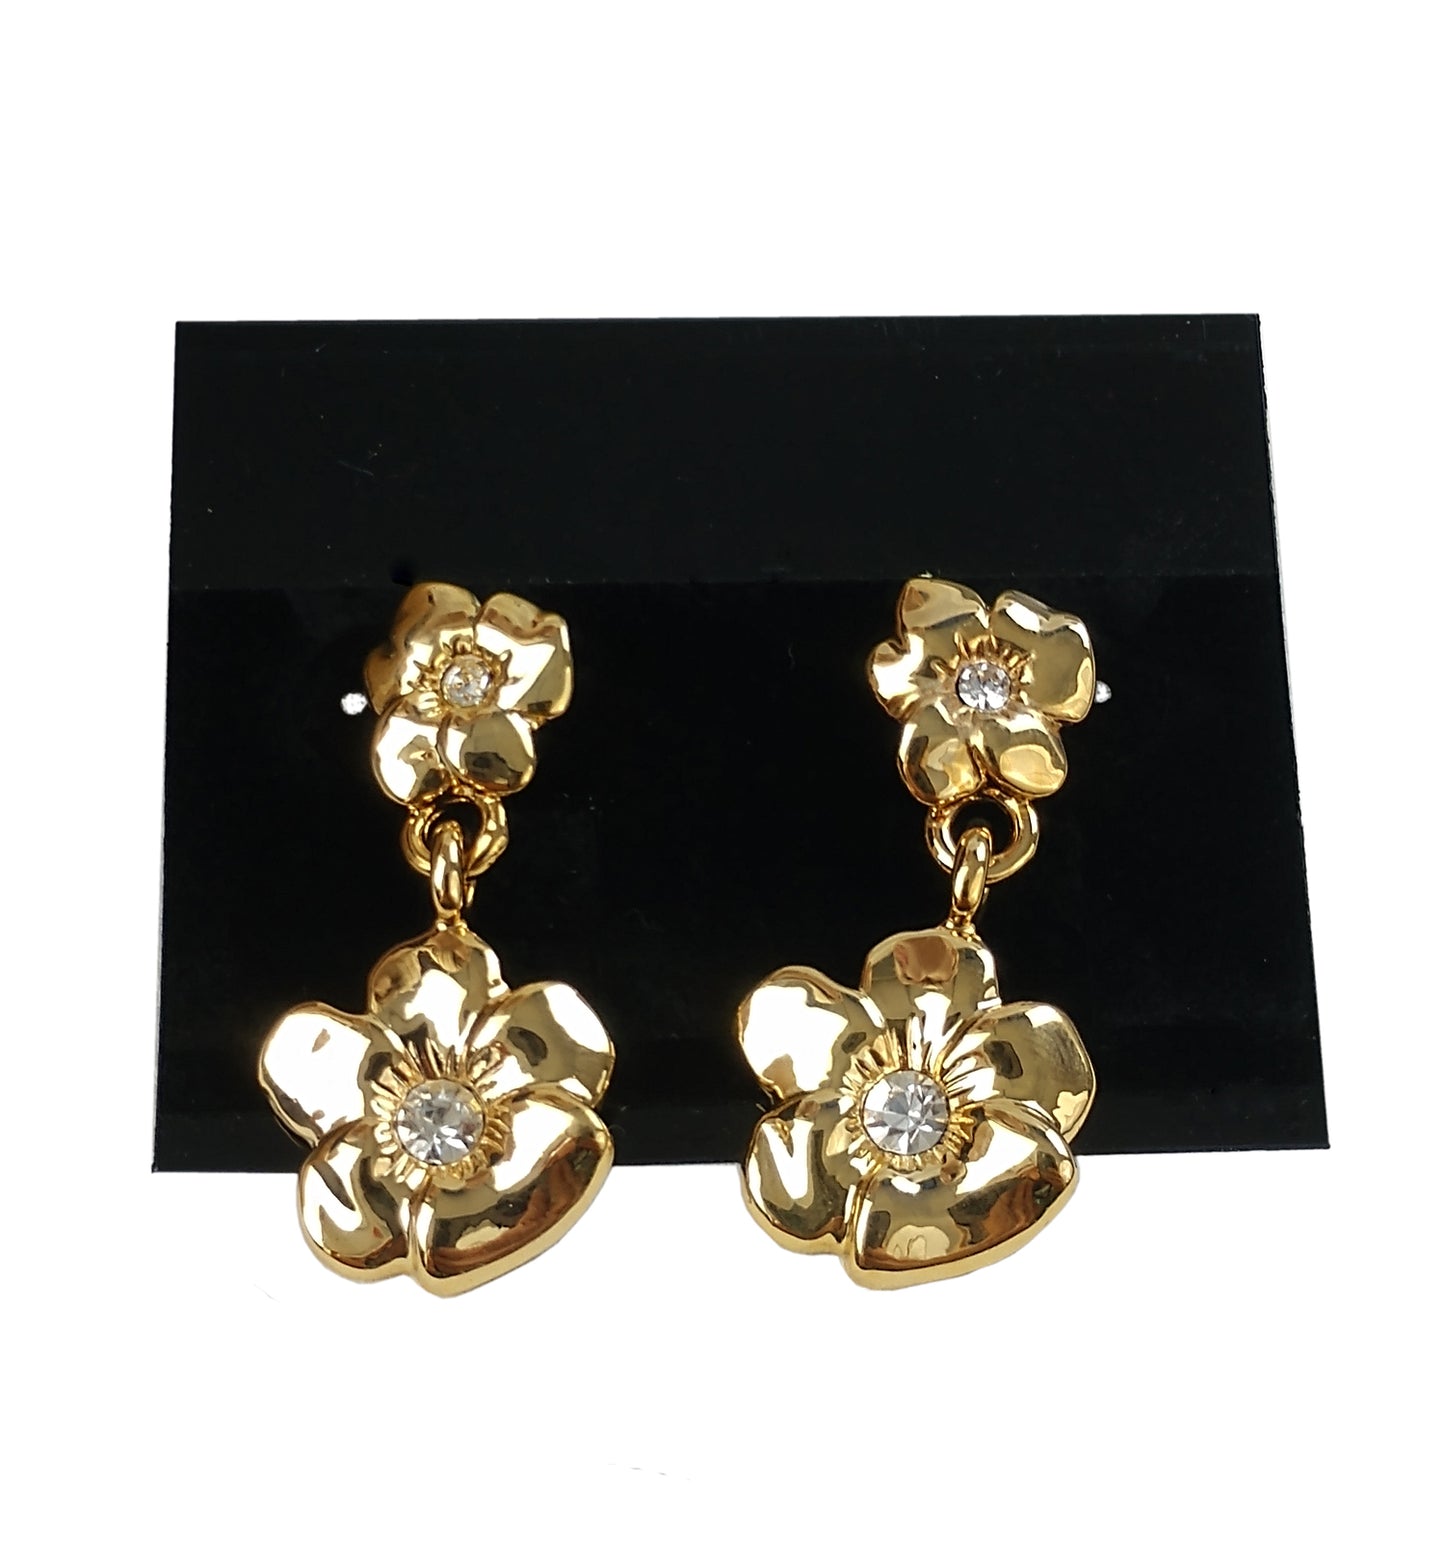 Flower Statement Earrings Polished Gold Tone 1 1/2"